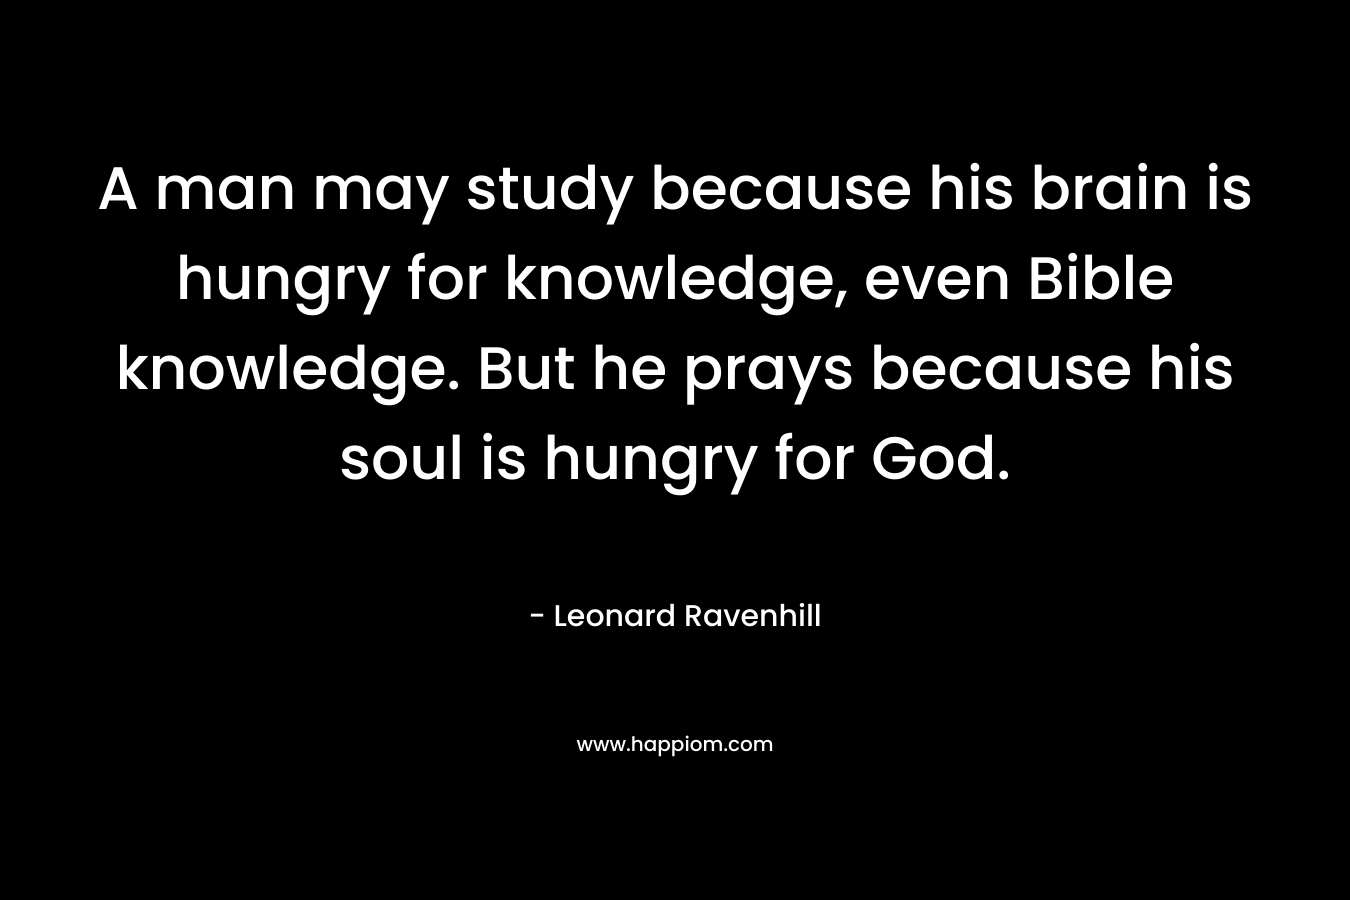 A man may study because his brain is hungry for knowledge, even Bible knowledge. But he prays because his soul is hungry for God.